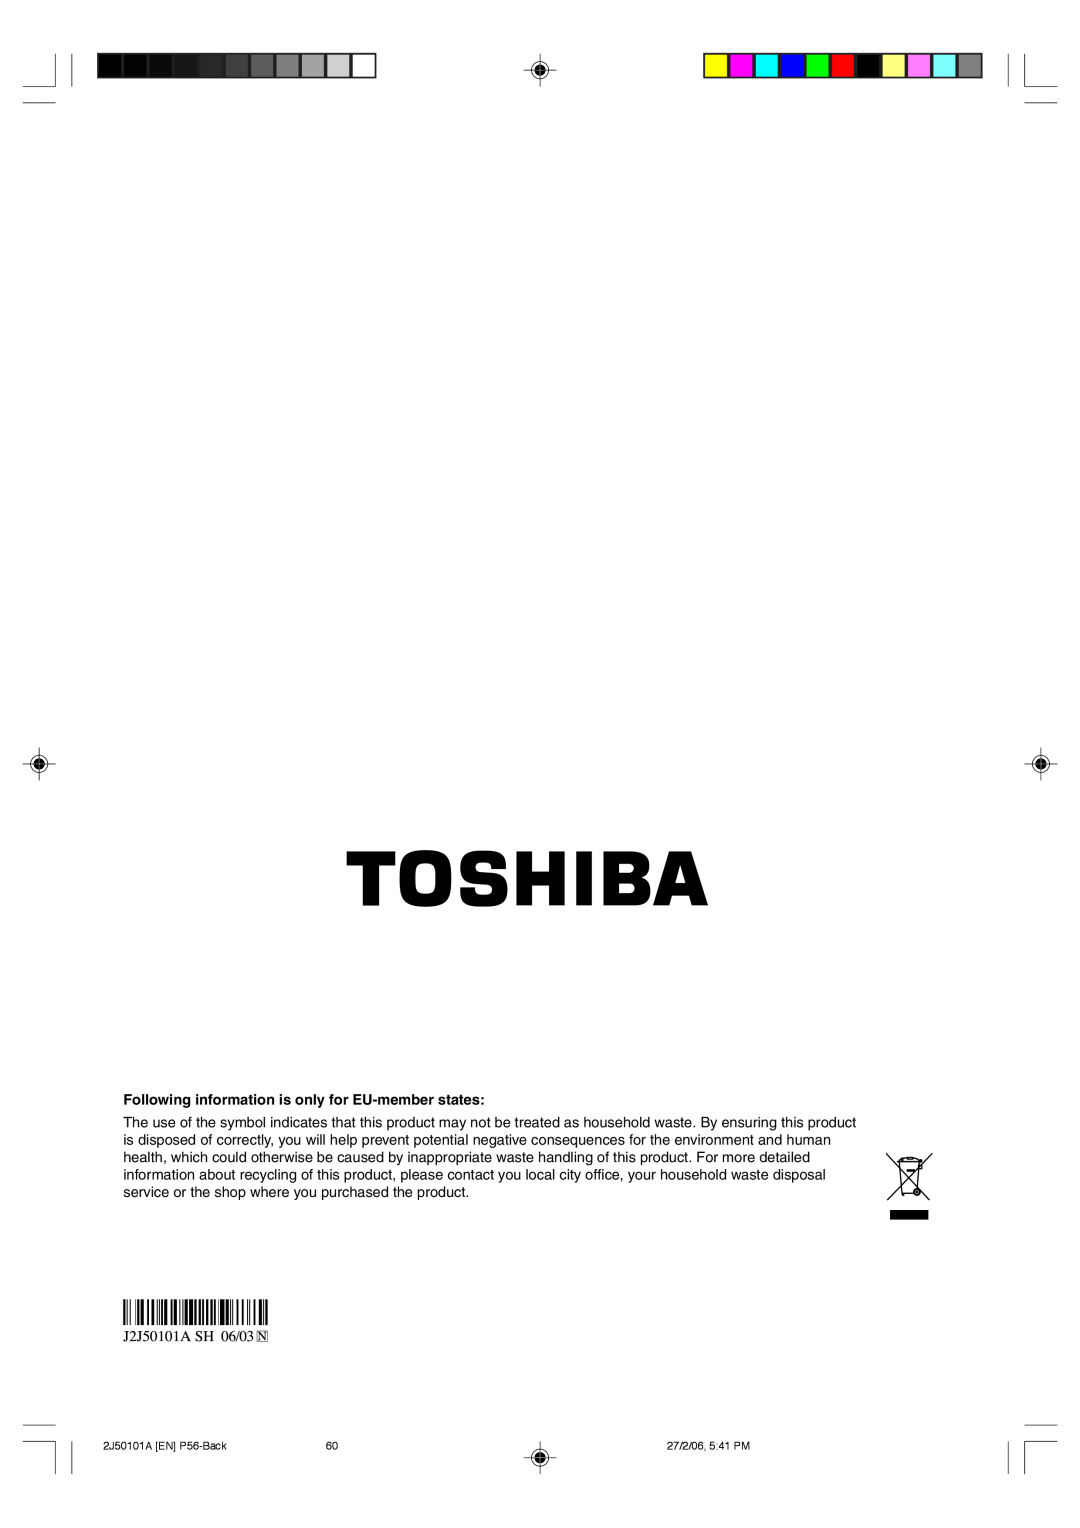 Toshiba SD-37VBSB Following information is only for EU-member states, service or the shop where you purchased the product 